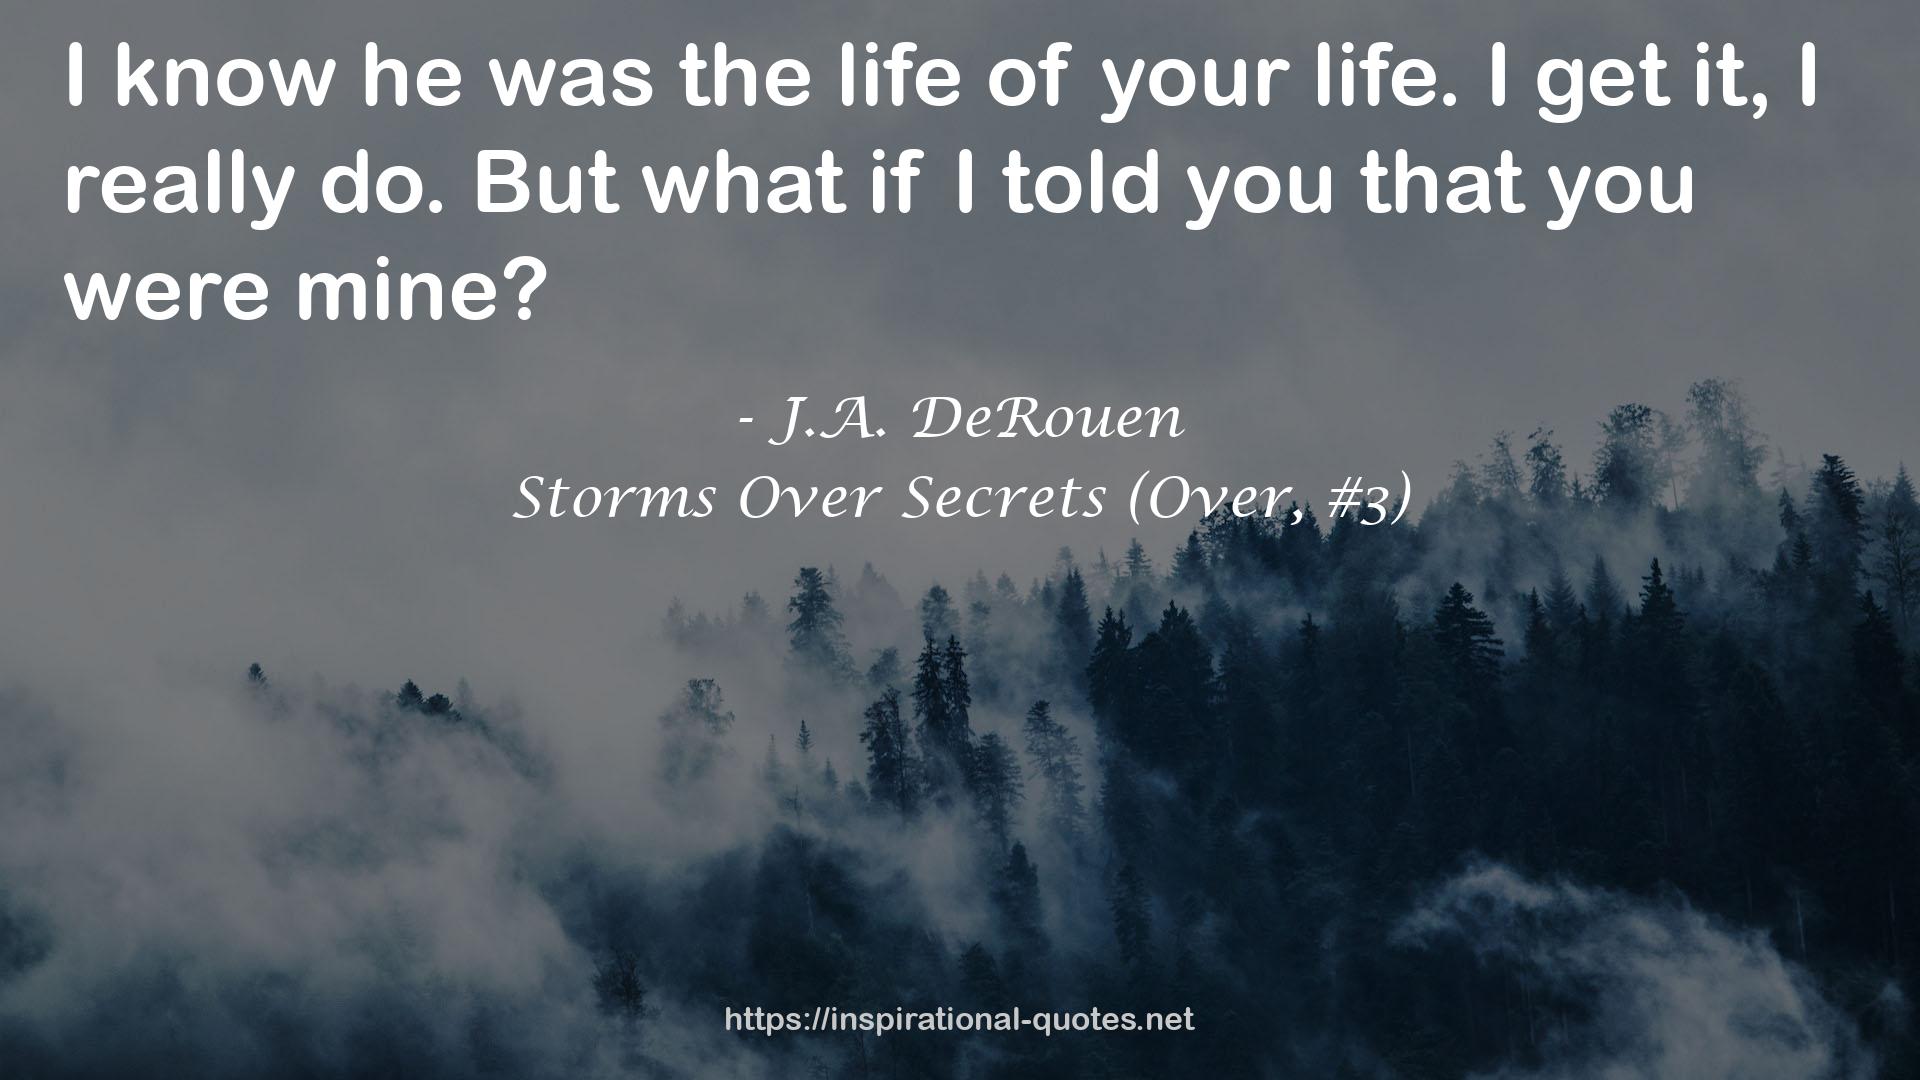 Storms Over Secrets (Over, #3) QUOTES